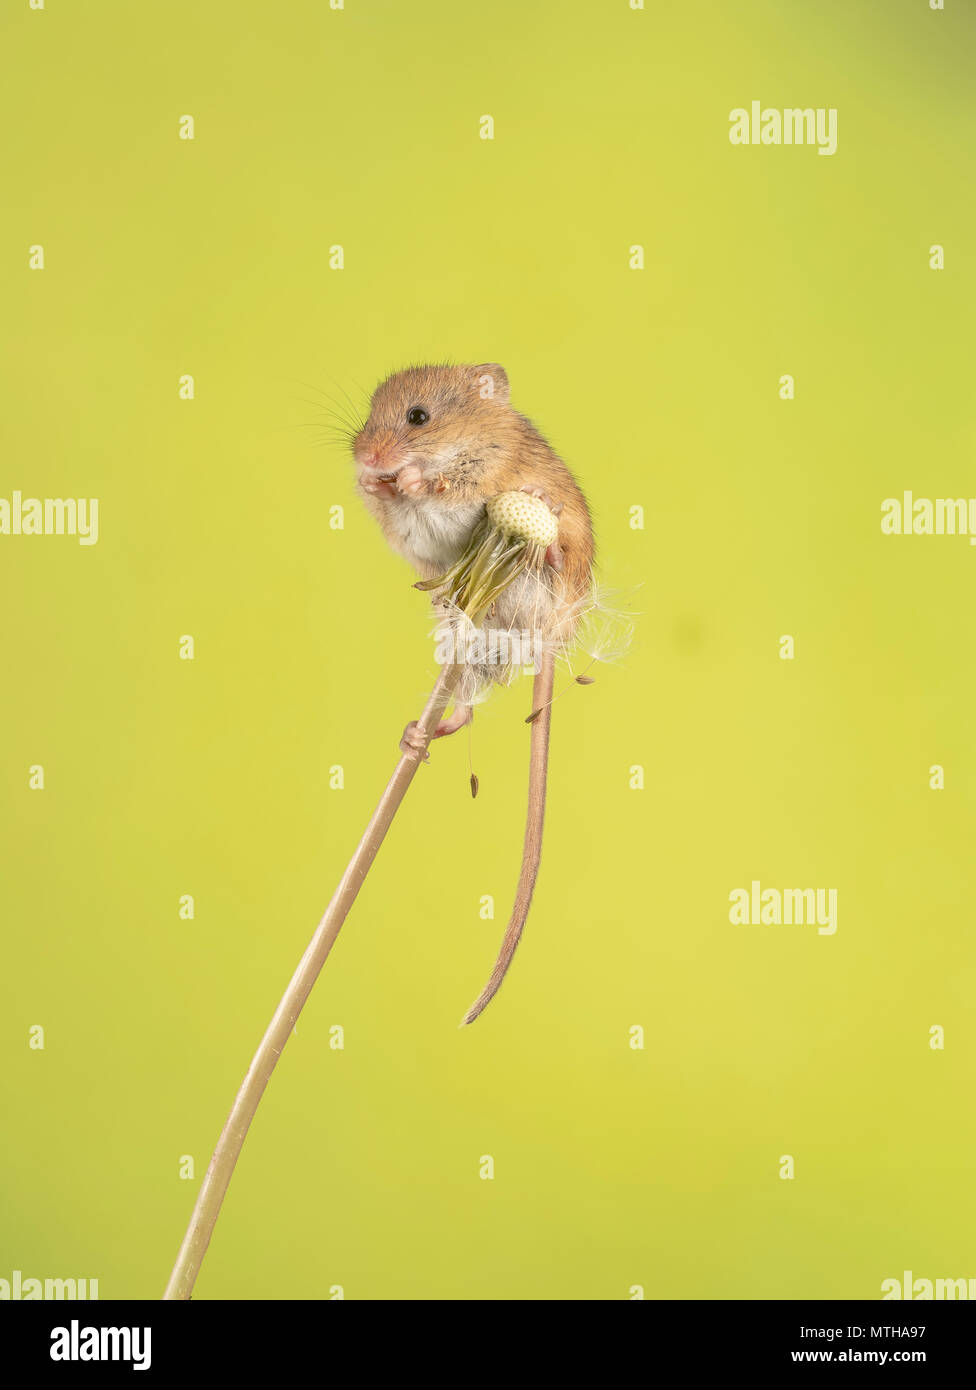 A harvest mouse climbing on and eating a dandelion Stock Photo